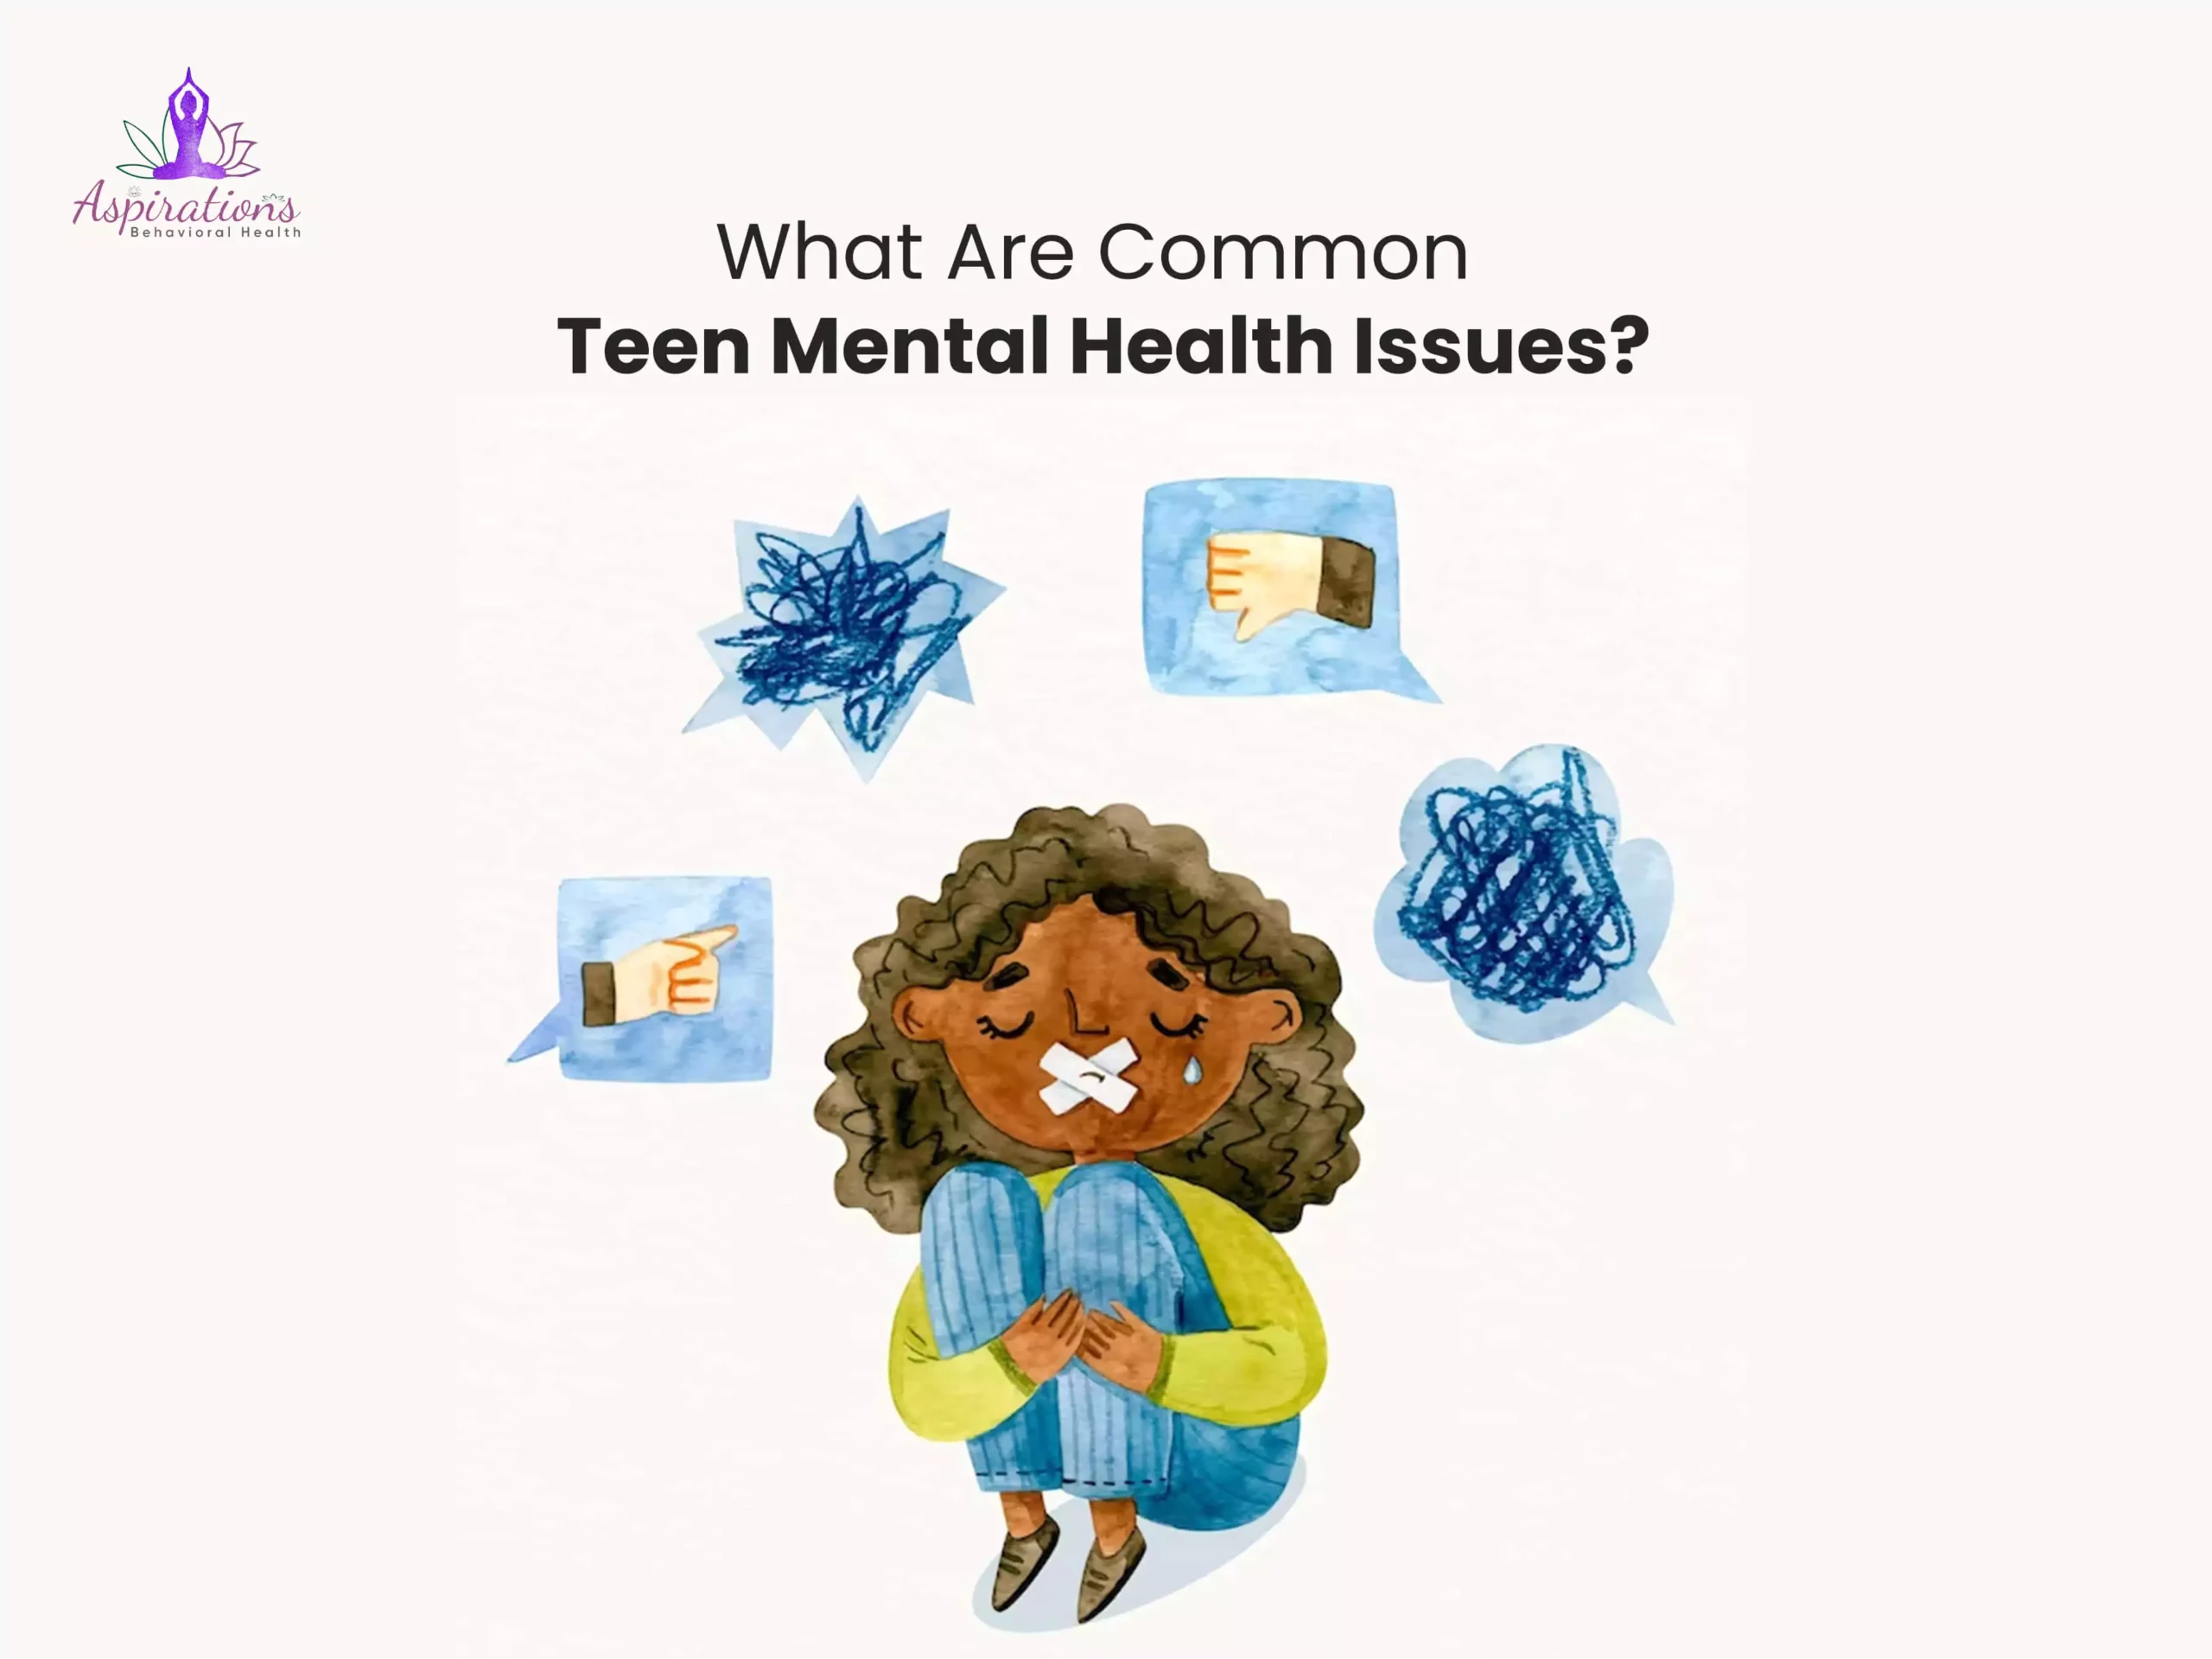 What Are Common Teen Mental Health Issues?